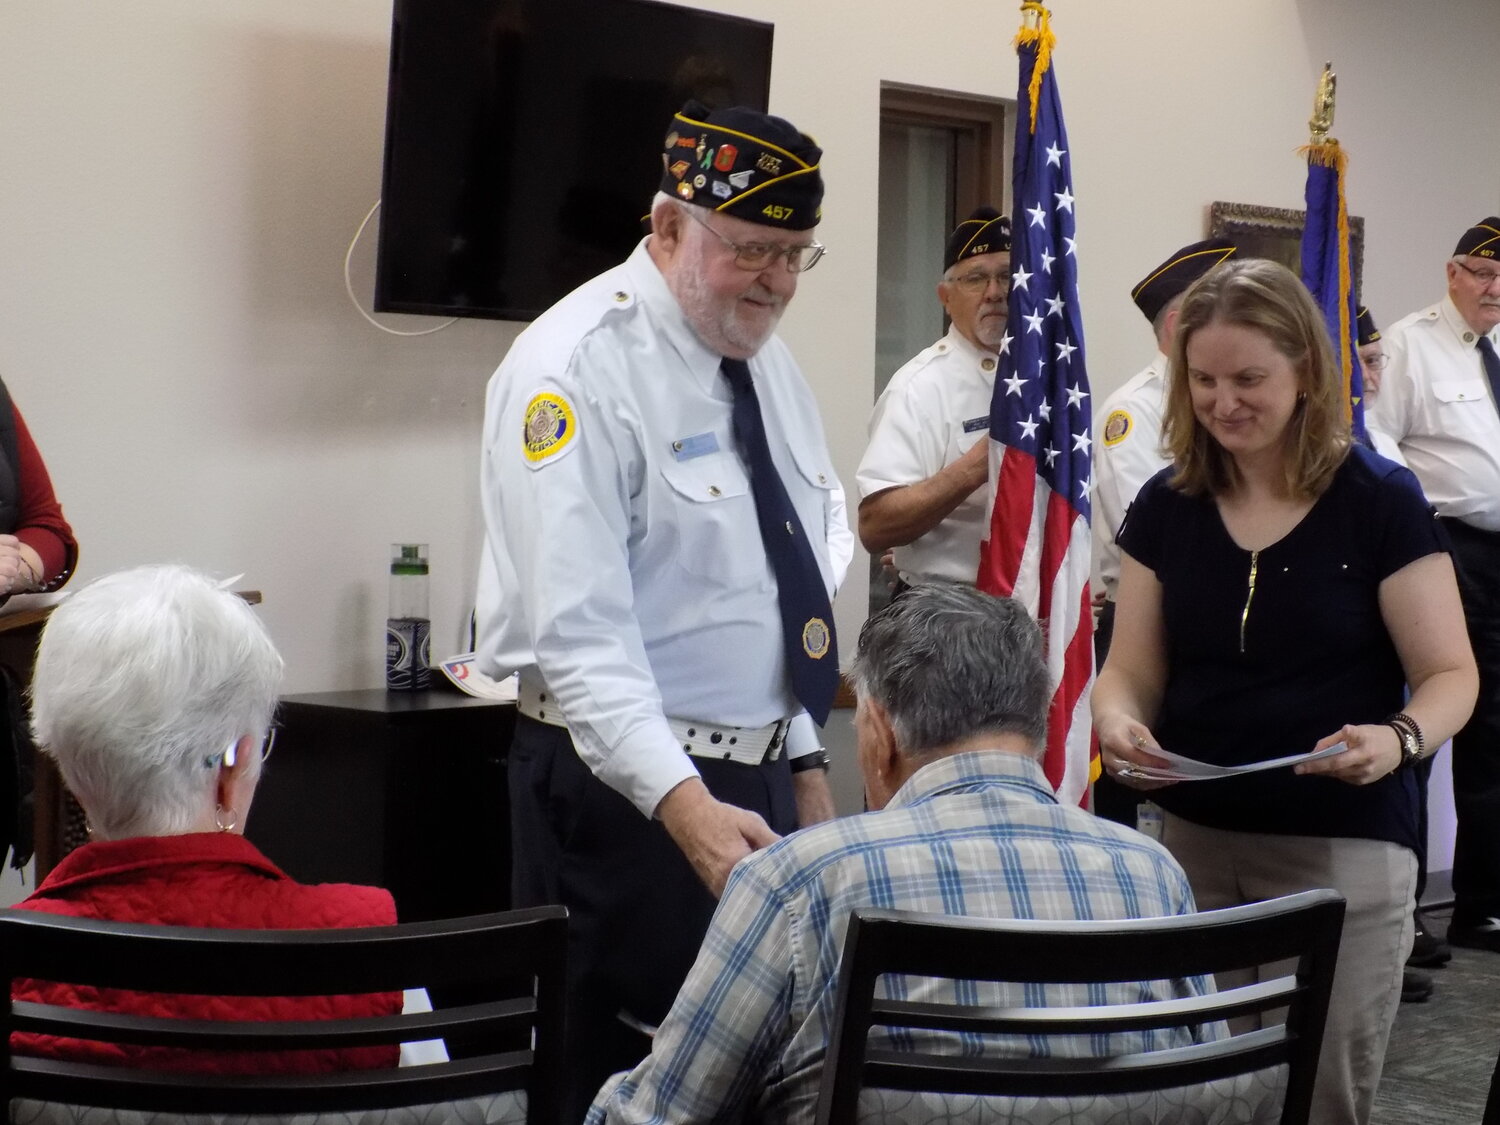 The Color Guard and Atrium Village’s staff presented resident veterans with certificates recognizing their service.